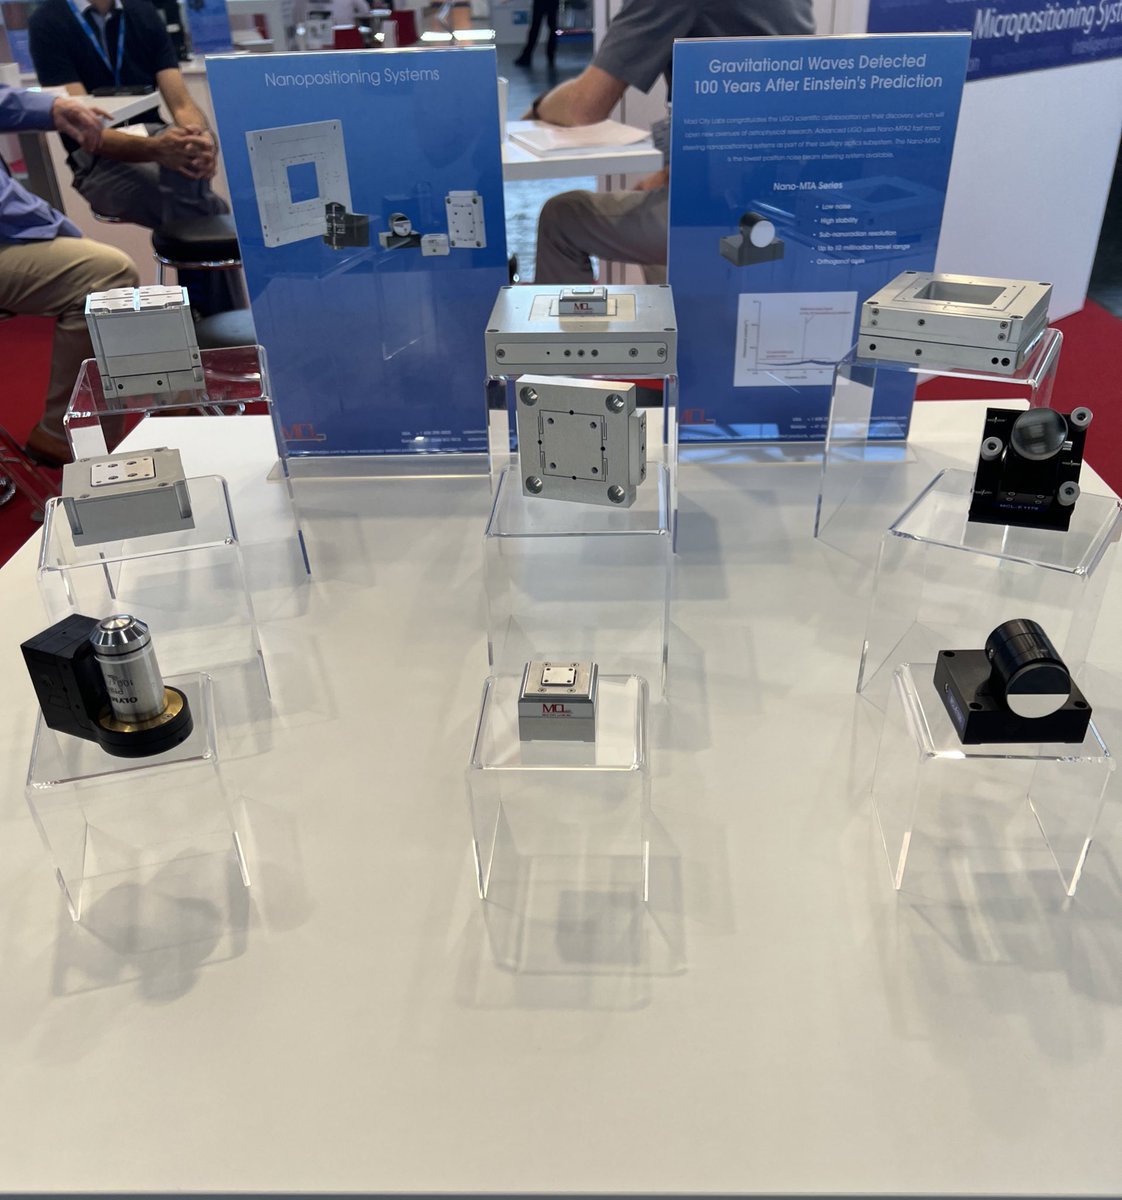 Last day @PHOTONICSWORLD!  Stop by Stand A2.328 before 16:00 to see our precision positioning solutions, atomic force microscopes and single molecule microscopes.  #metrology #nanopositioners #inspection #imaging #quantum #microscopy